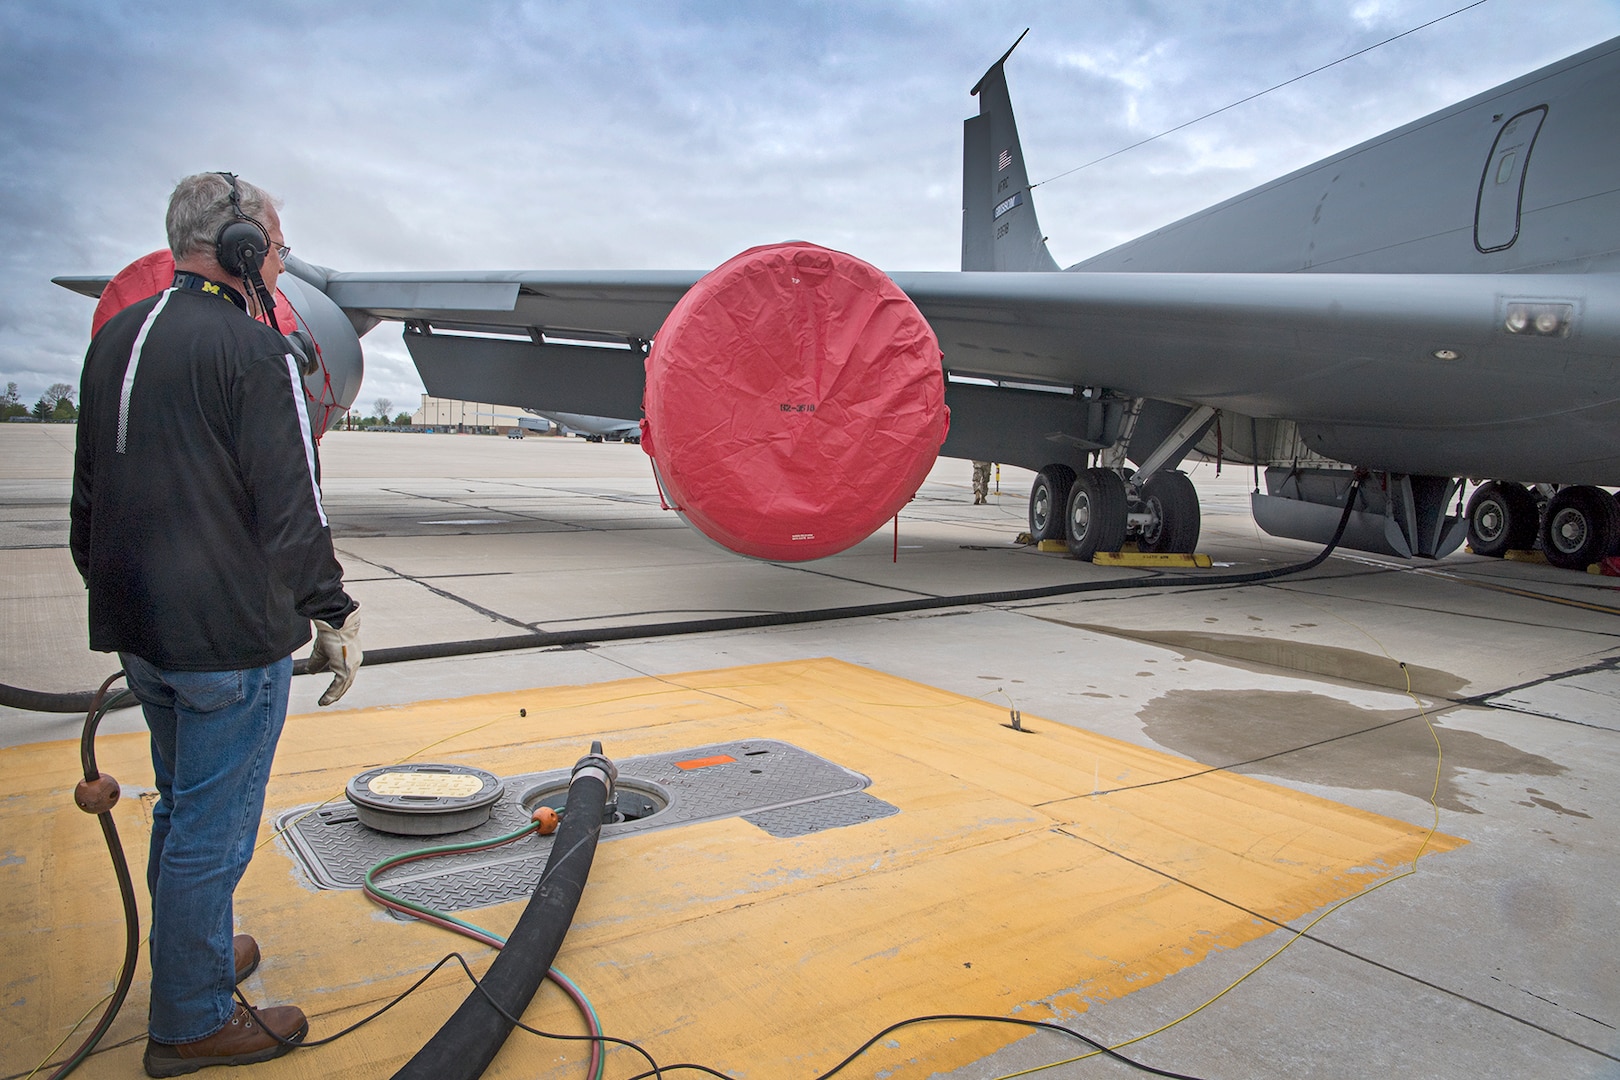 Danny Bowlin, a fuels contractor, pumps fuel from a new $35 million Type III fuel hydrant system, to a KC-135R Stratotanker on May 4, 2021 at Grissom Air Reserve Base. The new system replaces a system installed in the 1950s. (U.S. Air Force photo/Douglas Hays)